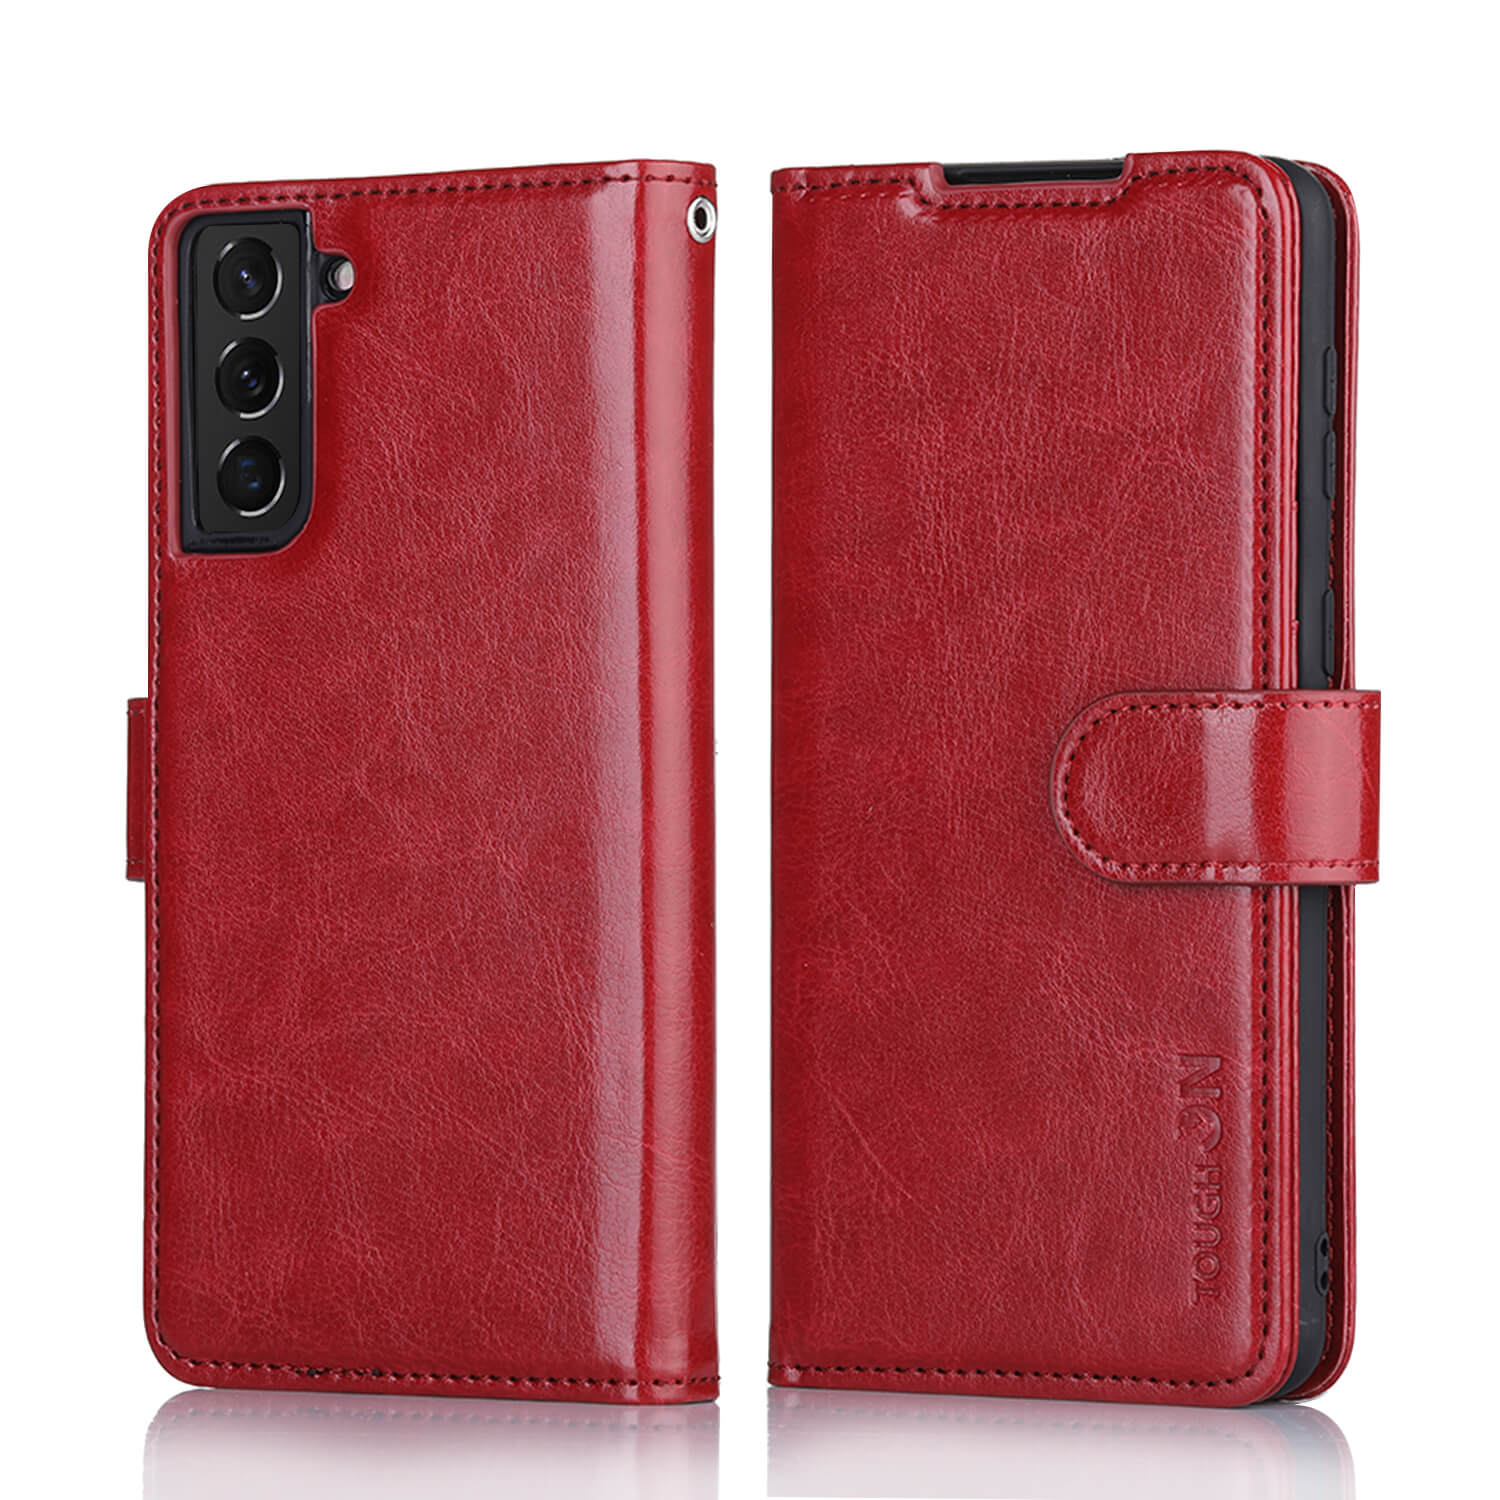 Tough On Samsung Galaxy S21 Plus 5G Case Leather Red